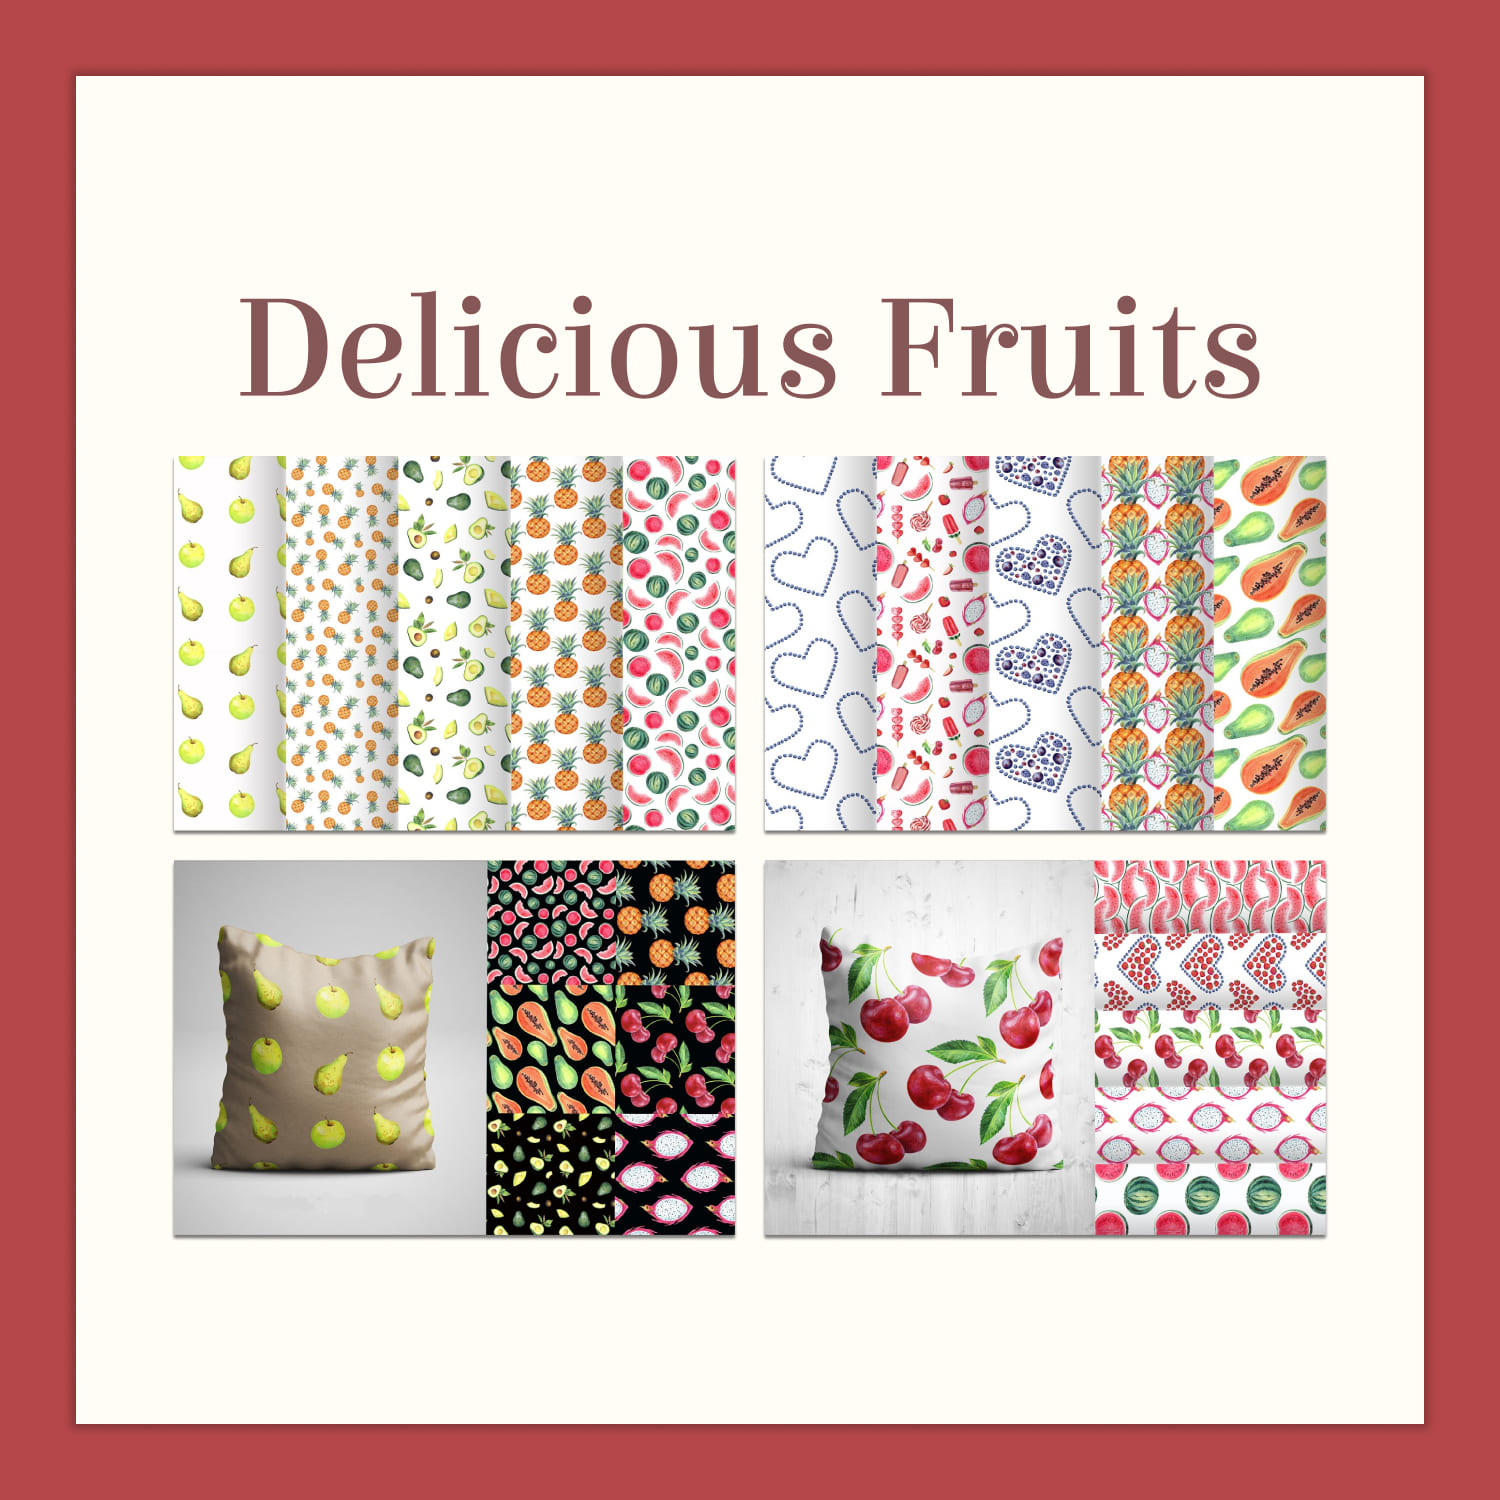 Delicious fruits - main image preview.